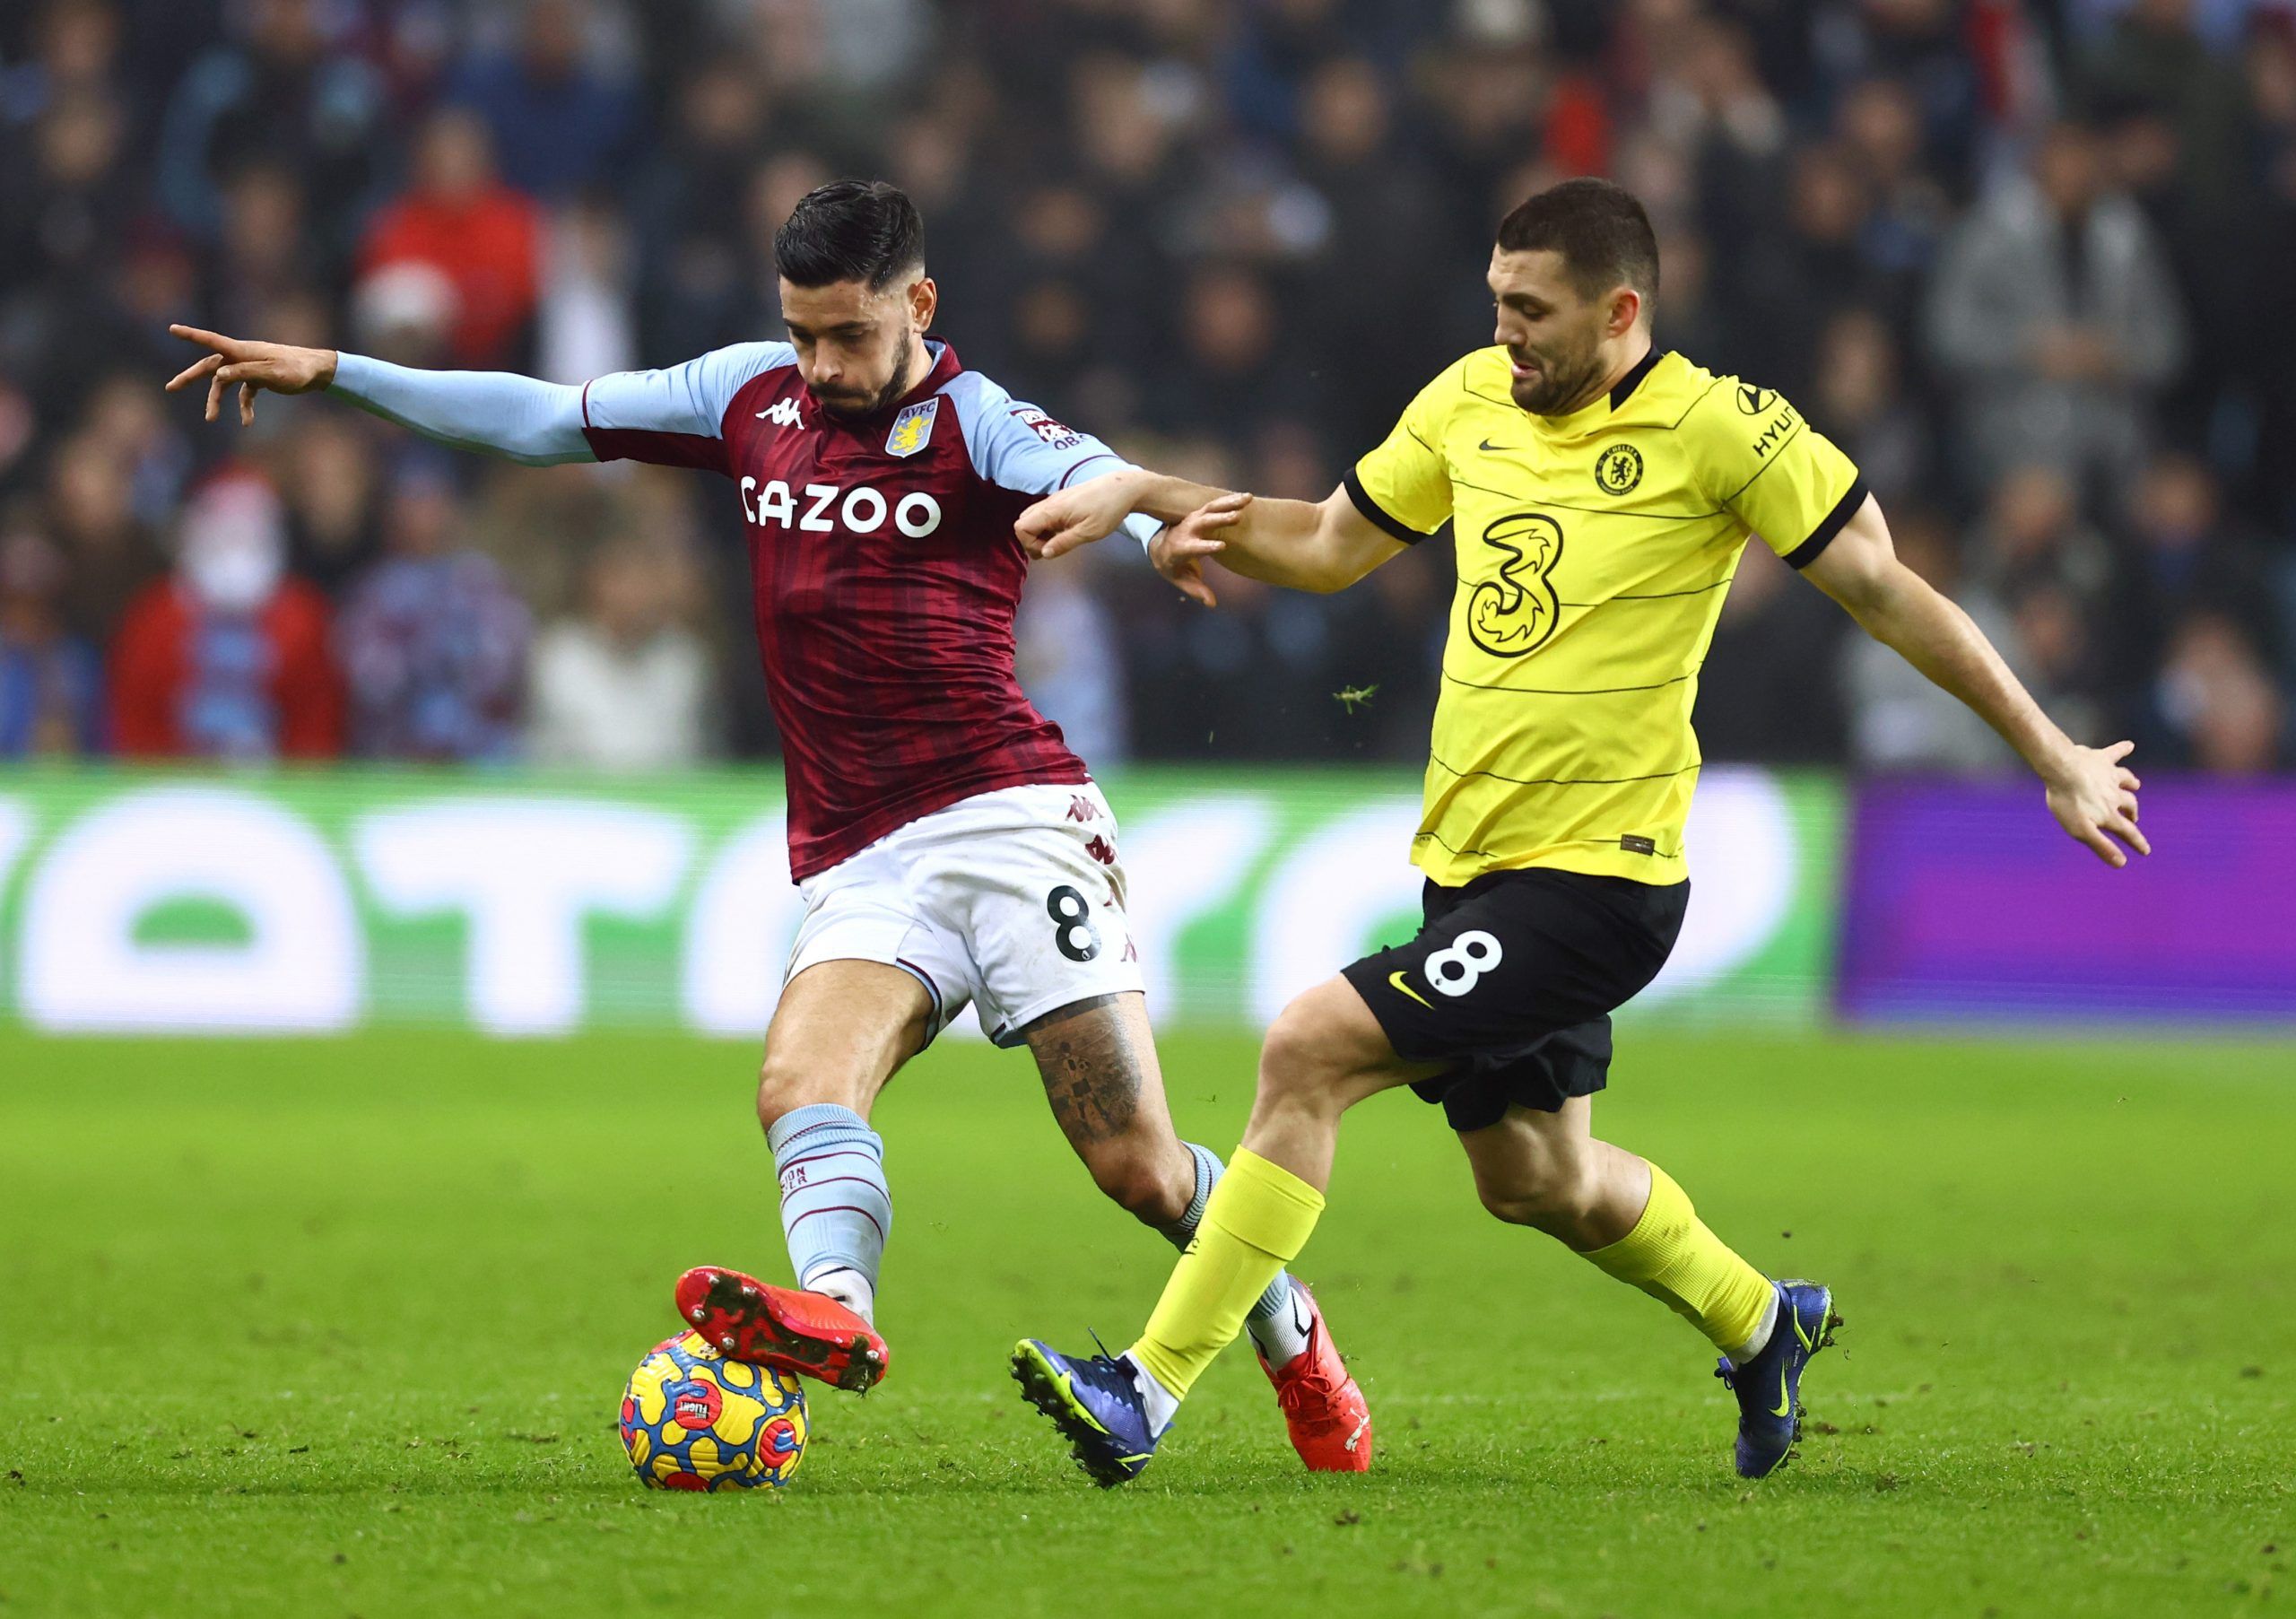 morgan-sanson-aston-villa-transfer-news-marseille-kamara-premier-league-transfer-latest-steven-gerrard-sanson-dean-smith-transferSoccer Football - Premier League - Aston Villa v Chelsea - Villa Park, Birmingham, Britain - December 26, 2021 Aston Villa's Morgan Sanson in action with Chelsea's Mateo Kovacic REUTERS/David Klein EDITORIAL USE ONLY. No use with unauthorized audio, video, data, fixture lists, club/league logos or 'live' services. Online in-match use limited to 75 images, no video emul